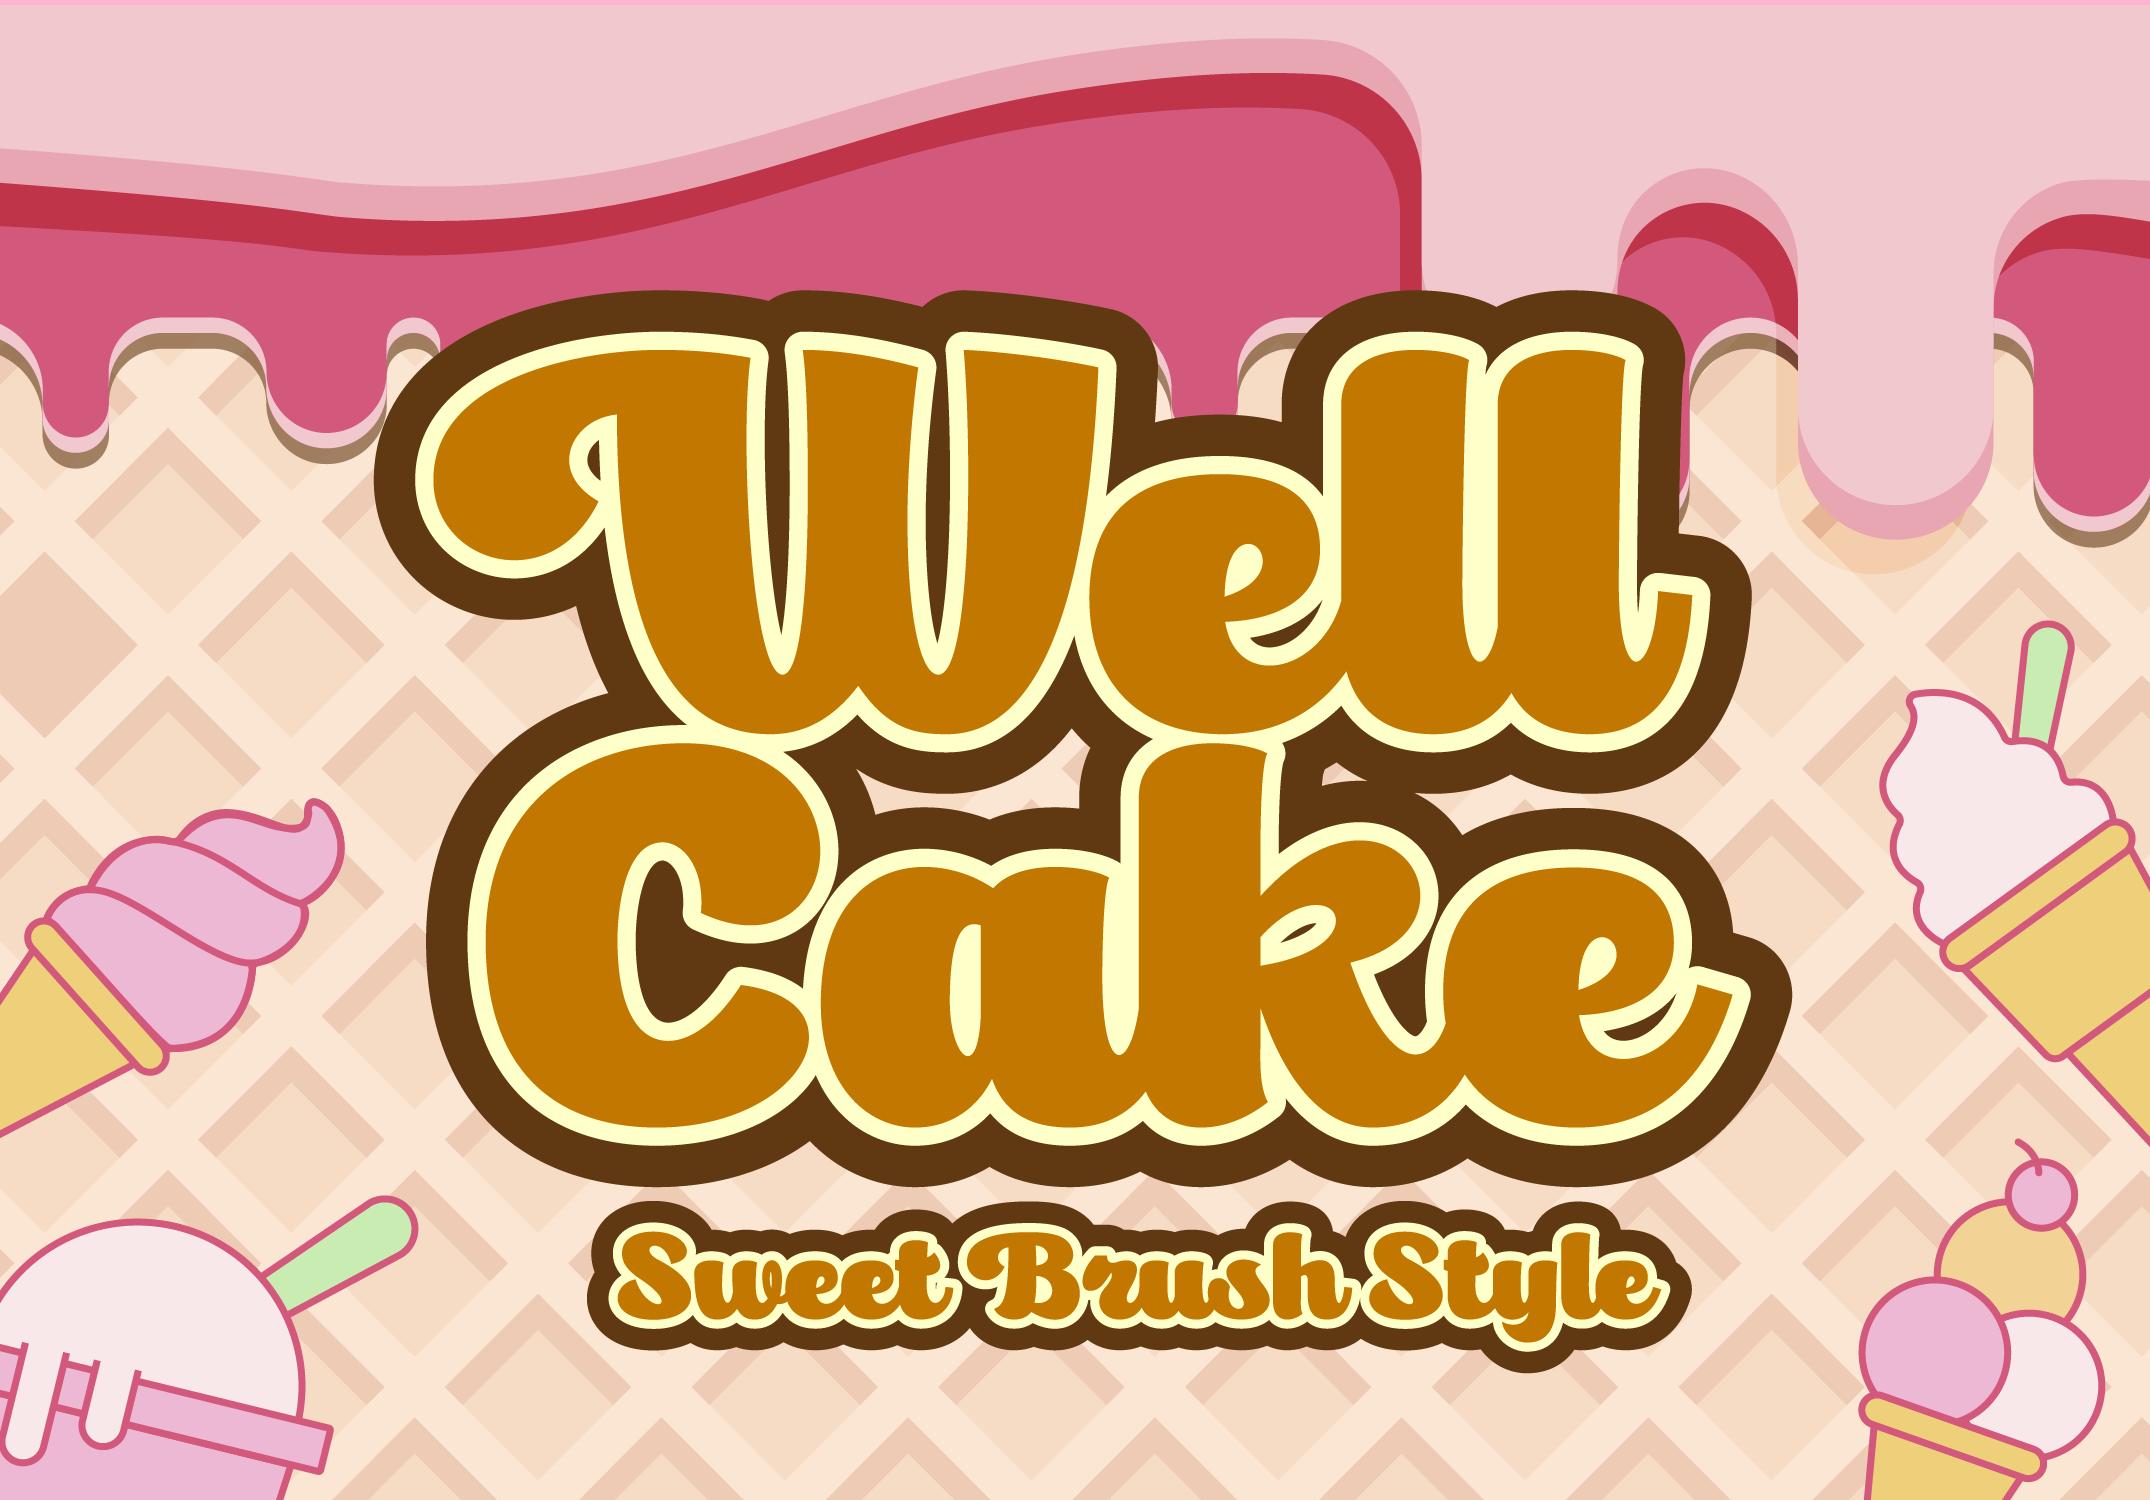 Well Cake Font